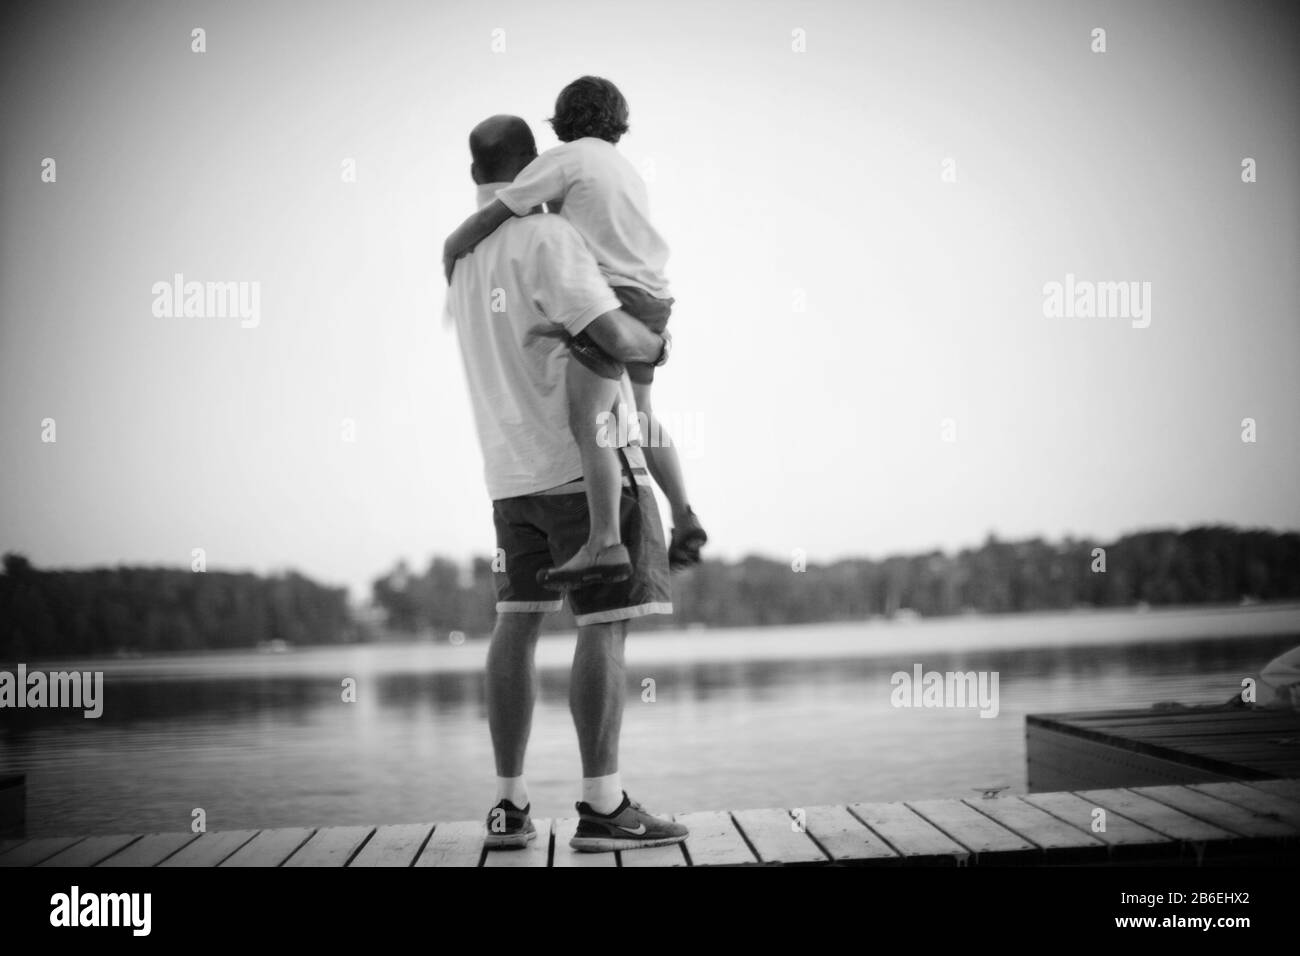 View of a man and his son enjoying beautiful scene. Stock Photo